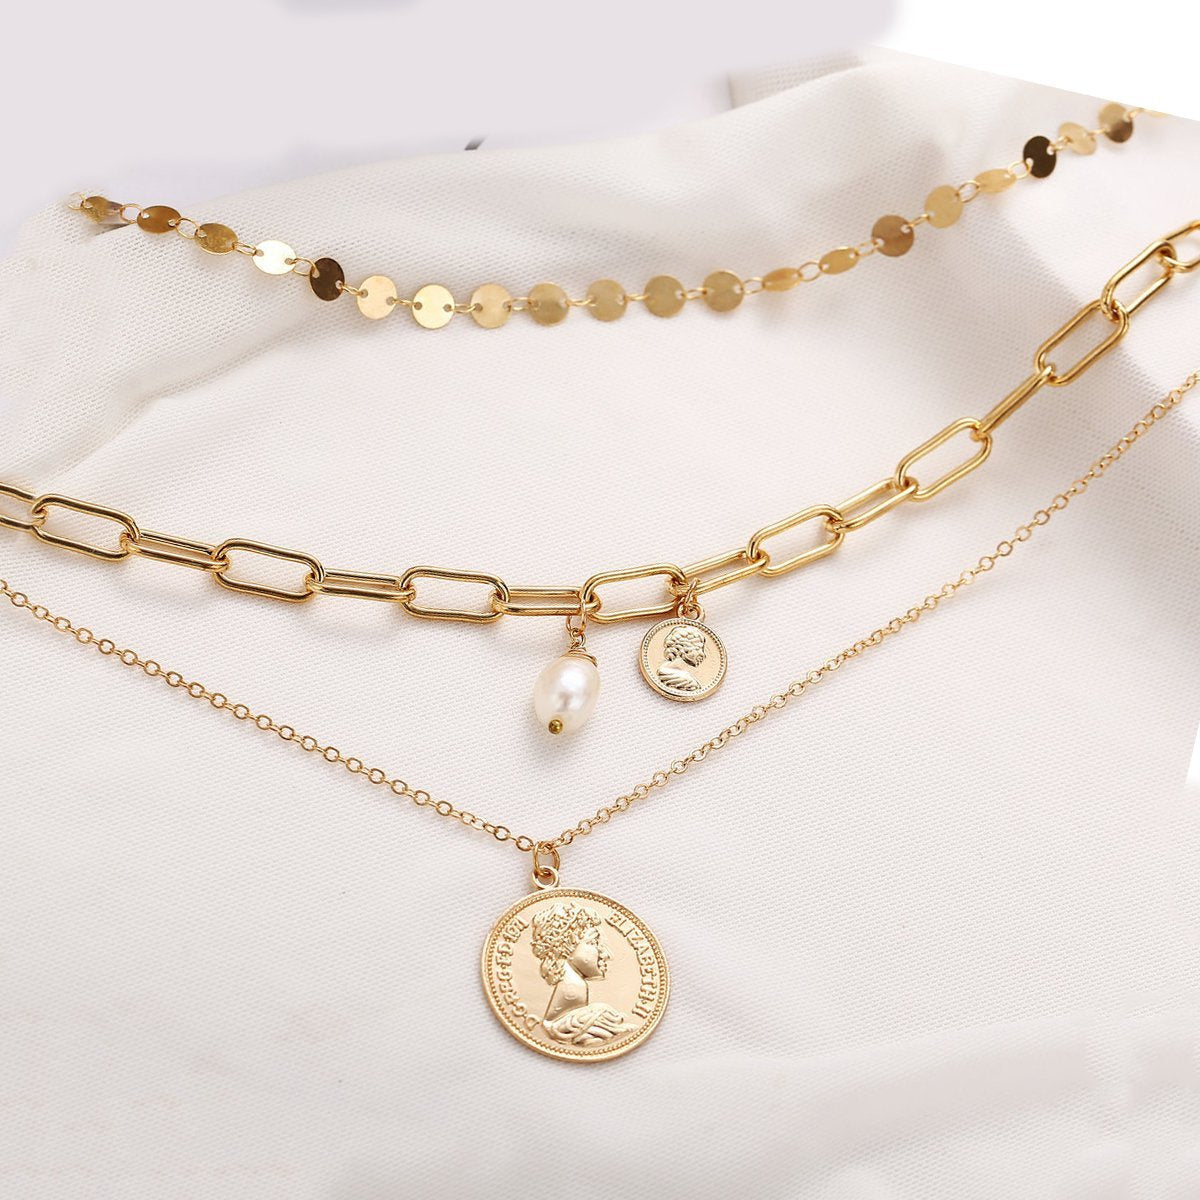 3 Piece Coin Pearl Necklace 18K Gold Plated Necklace in 18K Gold Plated ITALY Design Elsy Style Necklace